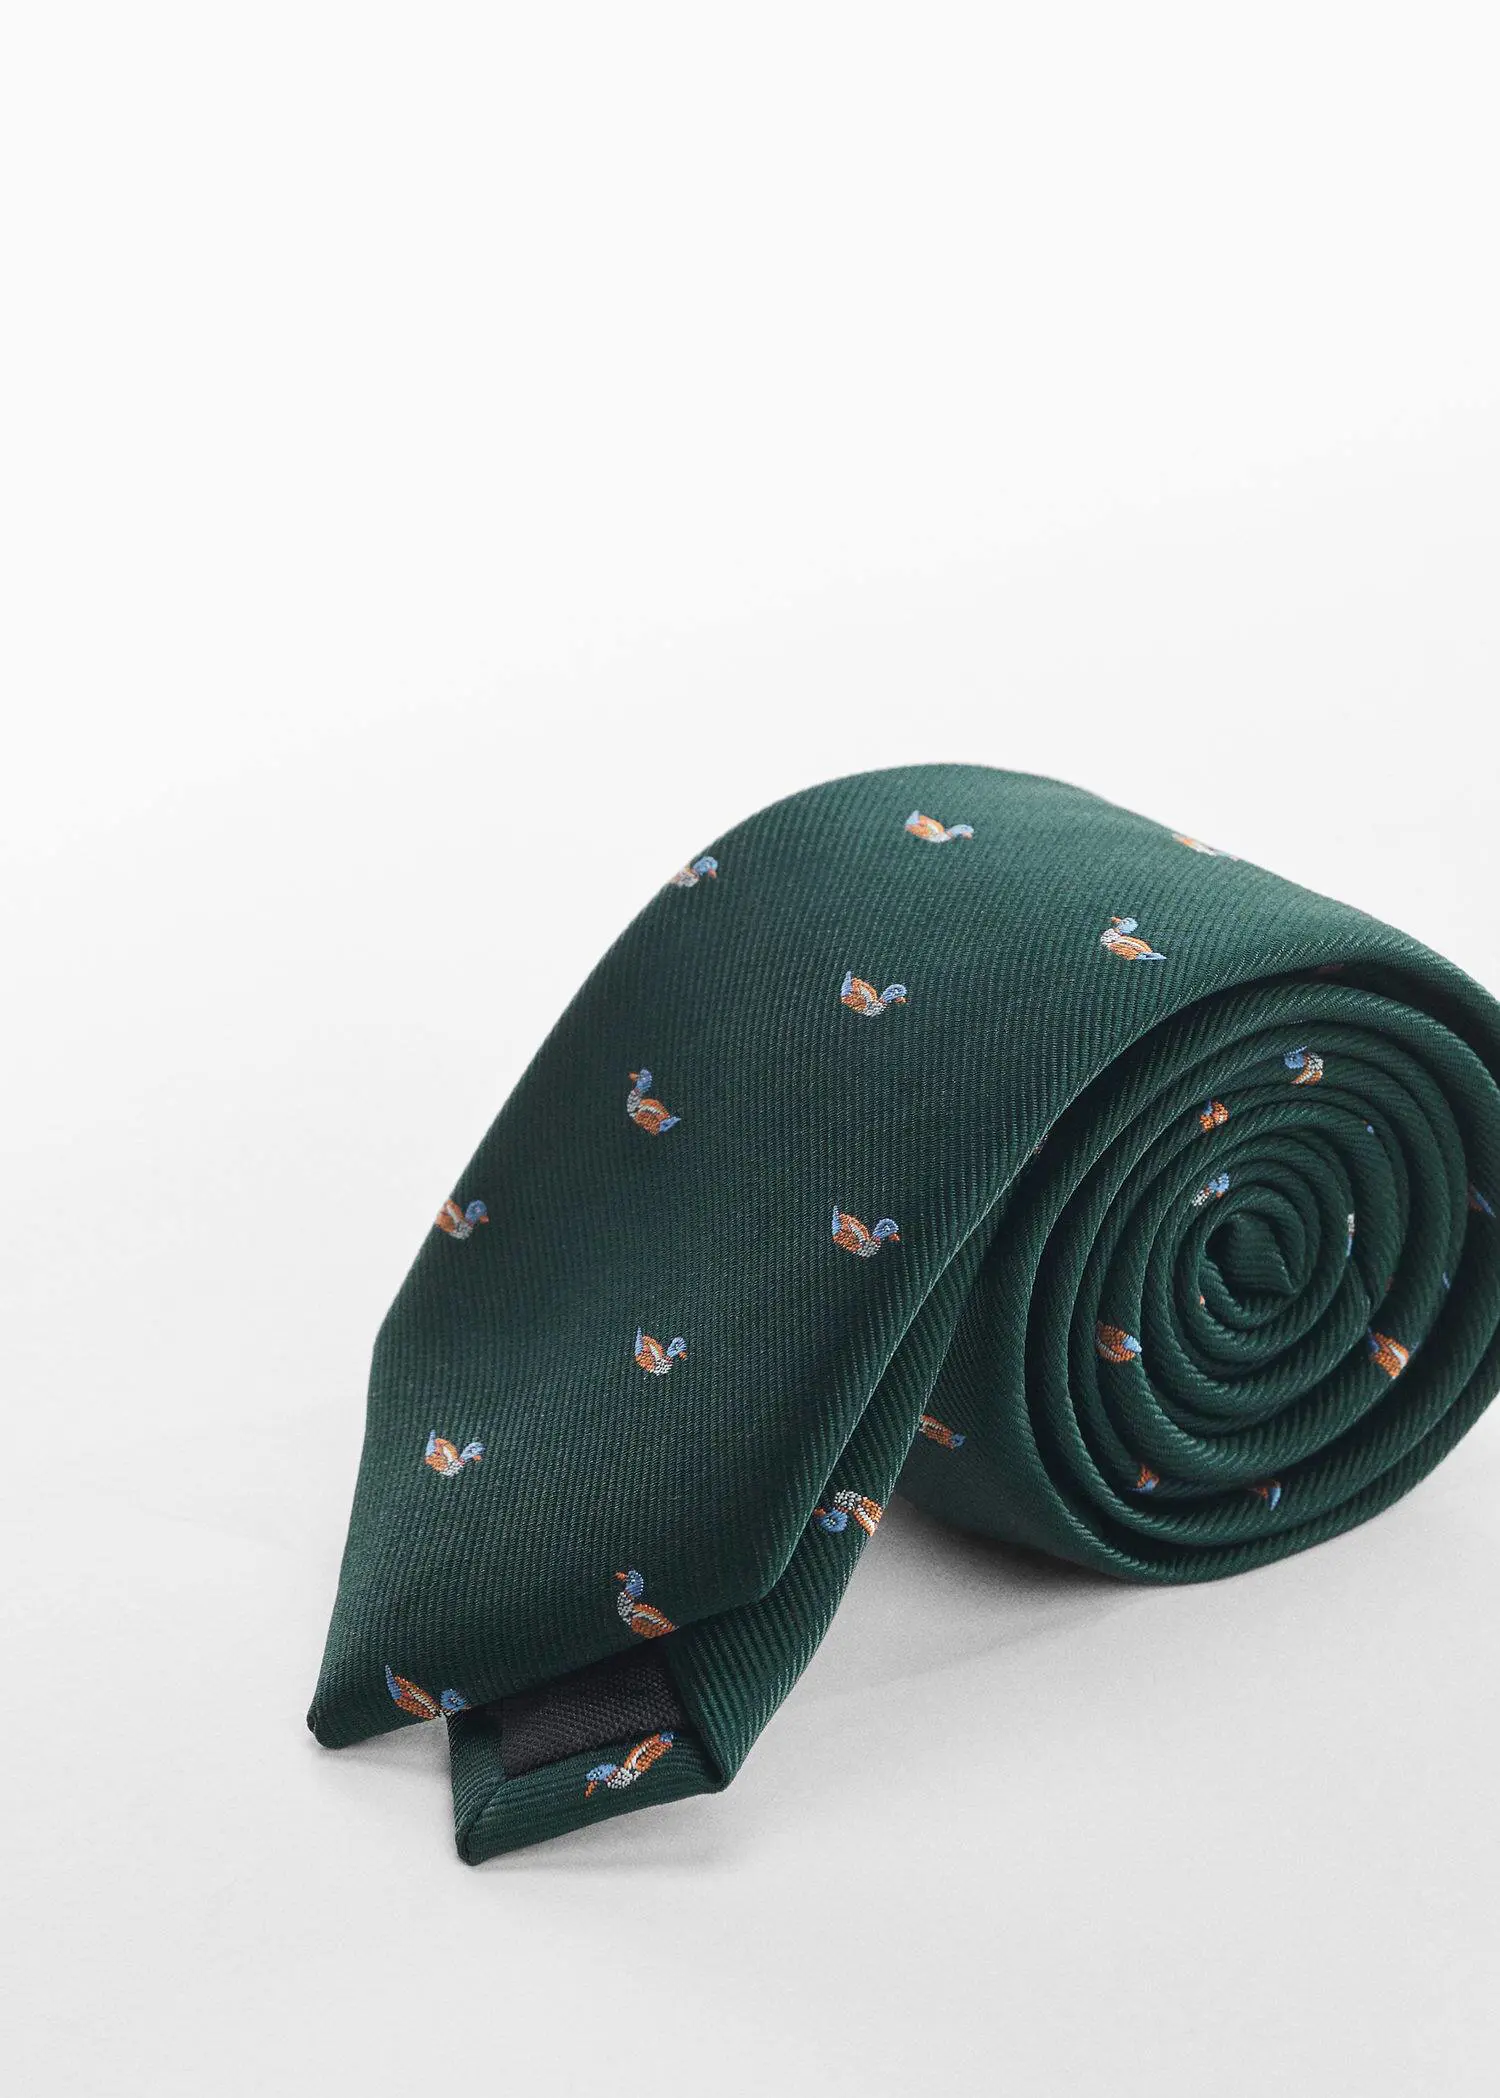 Mango Floral print tie. a close up of a tie on a white surface 